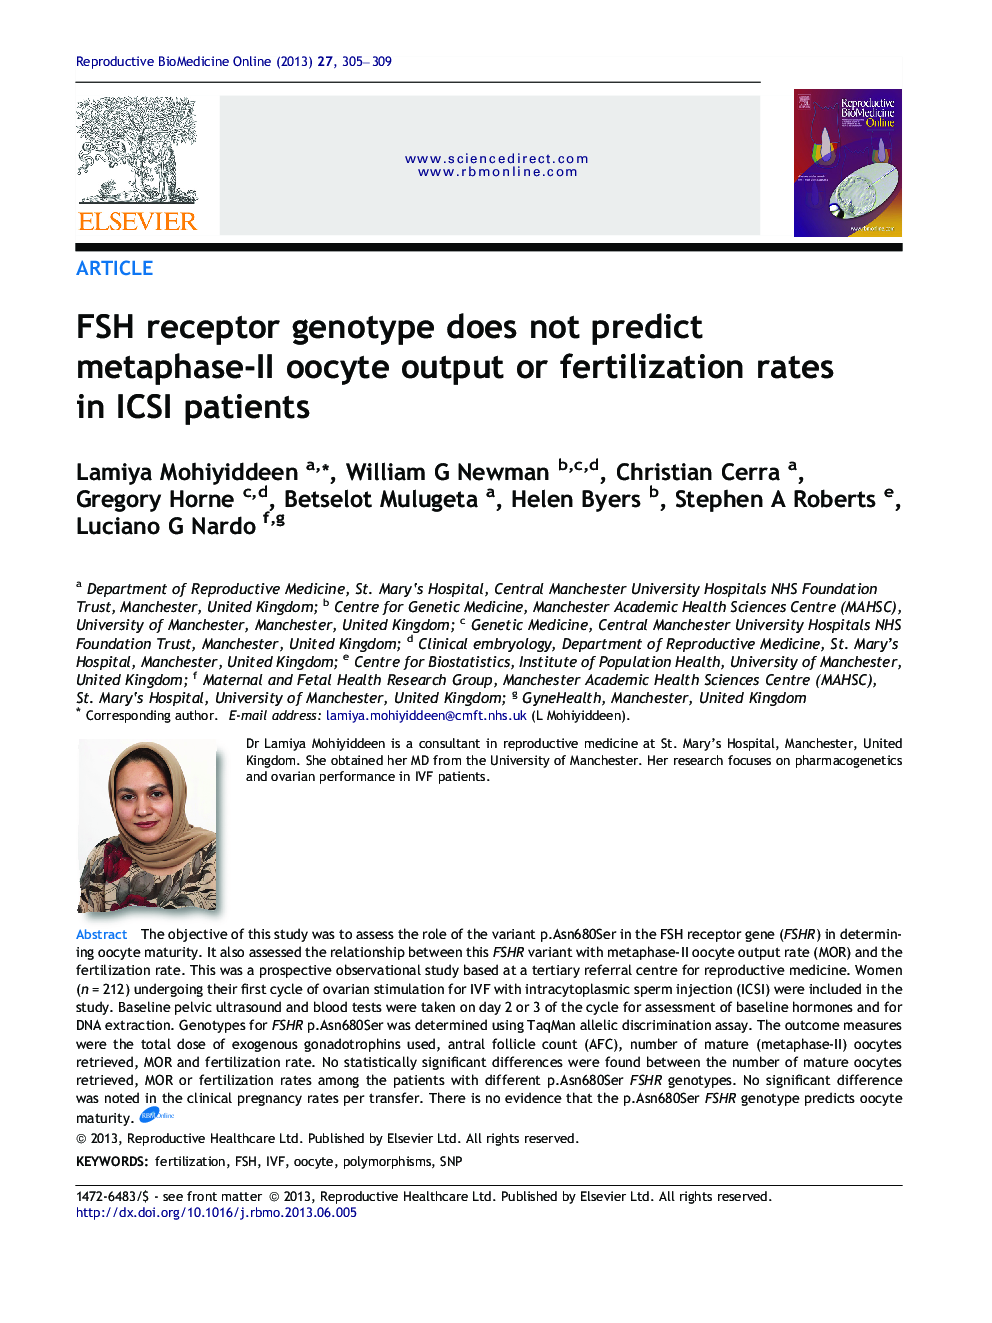 FSH receptor genotype does not predict metaphase-II oocyte output or fertilization rates in ICSI patients  